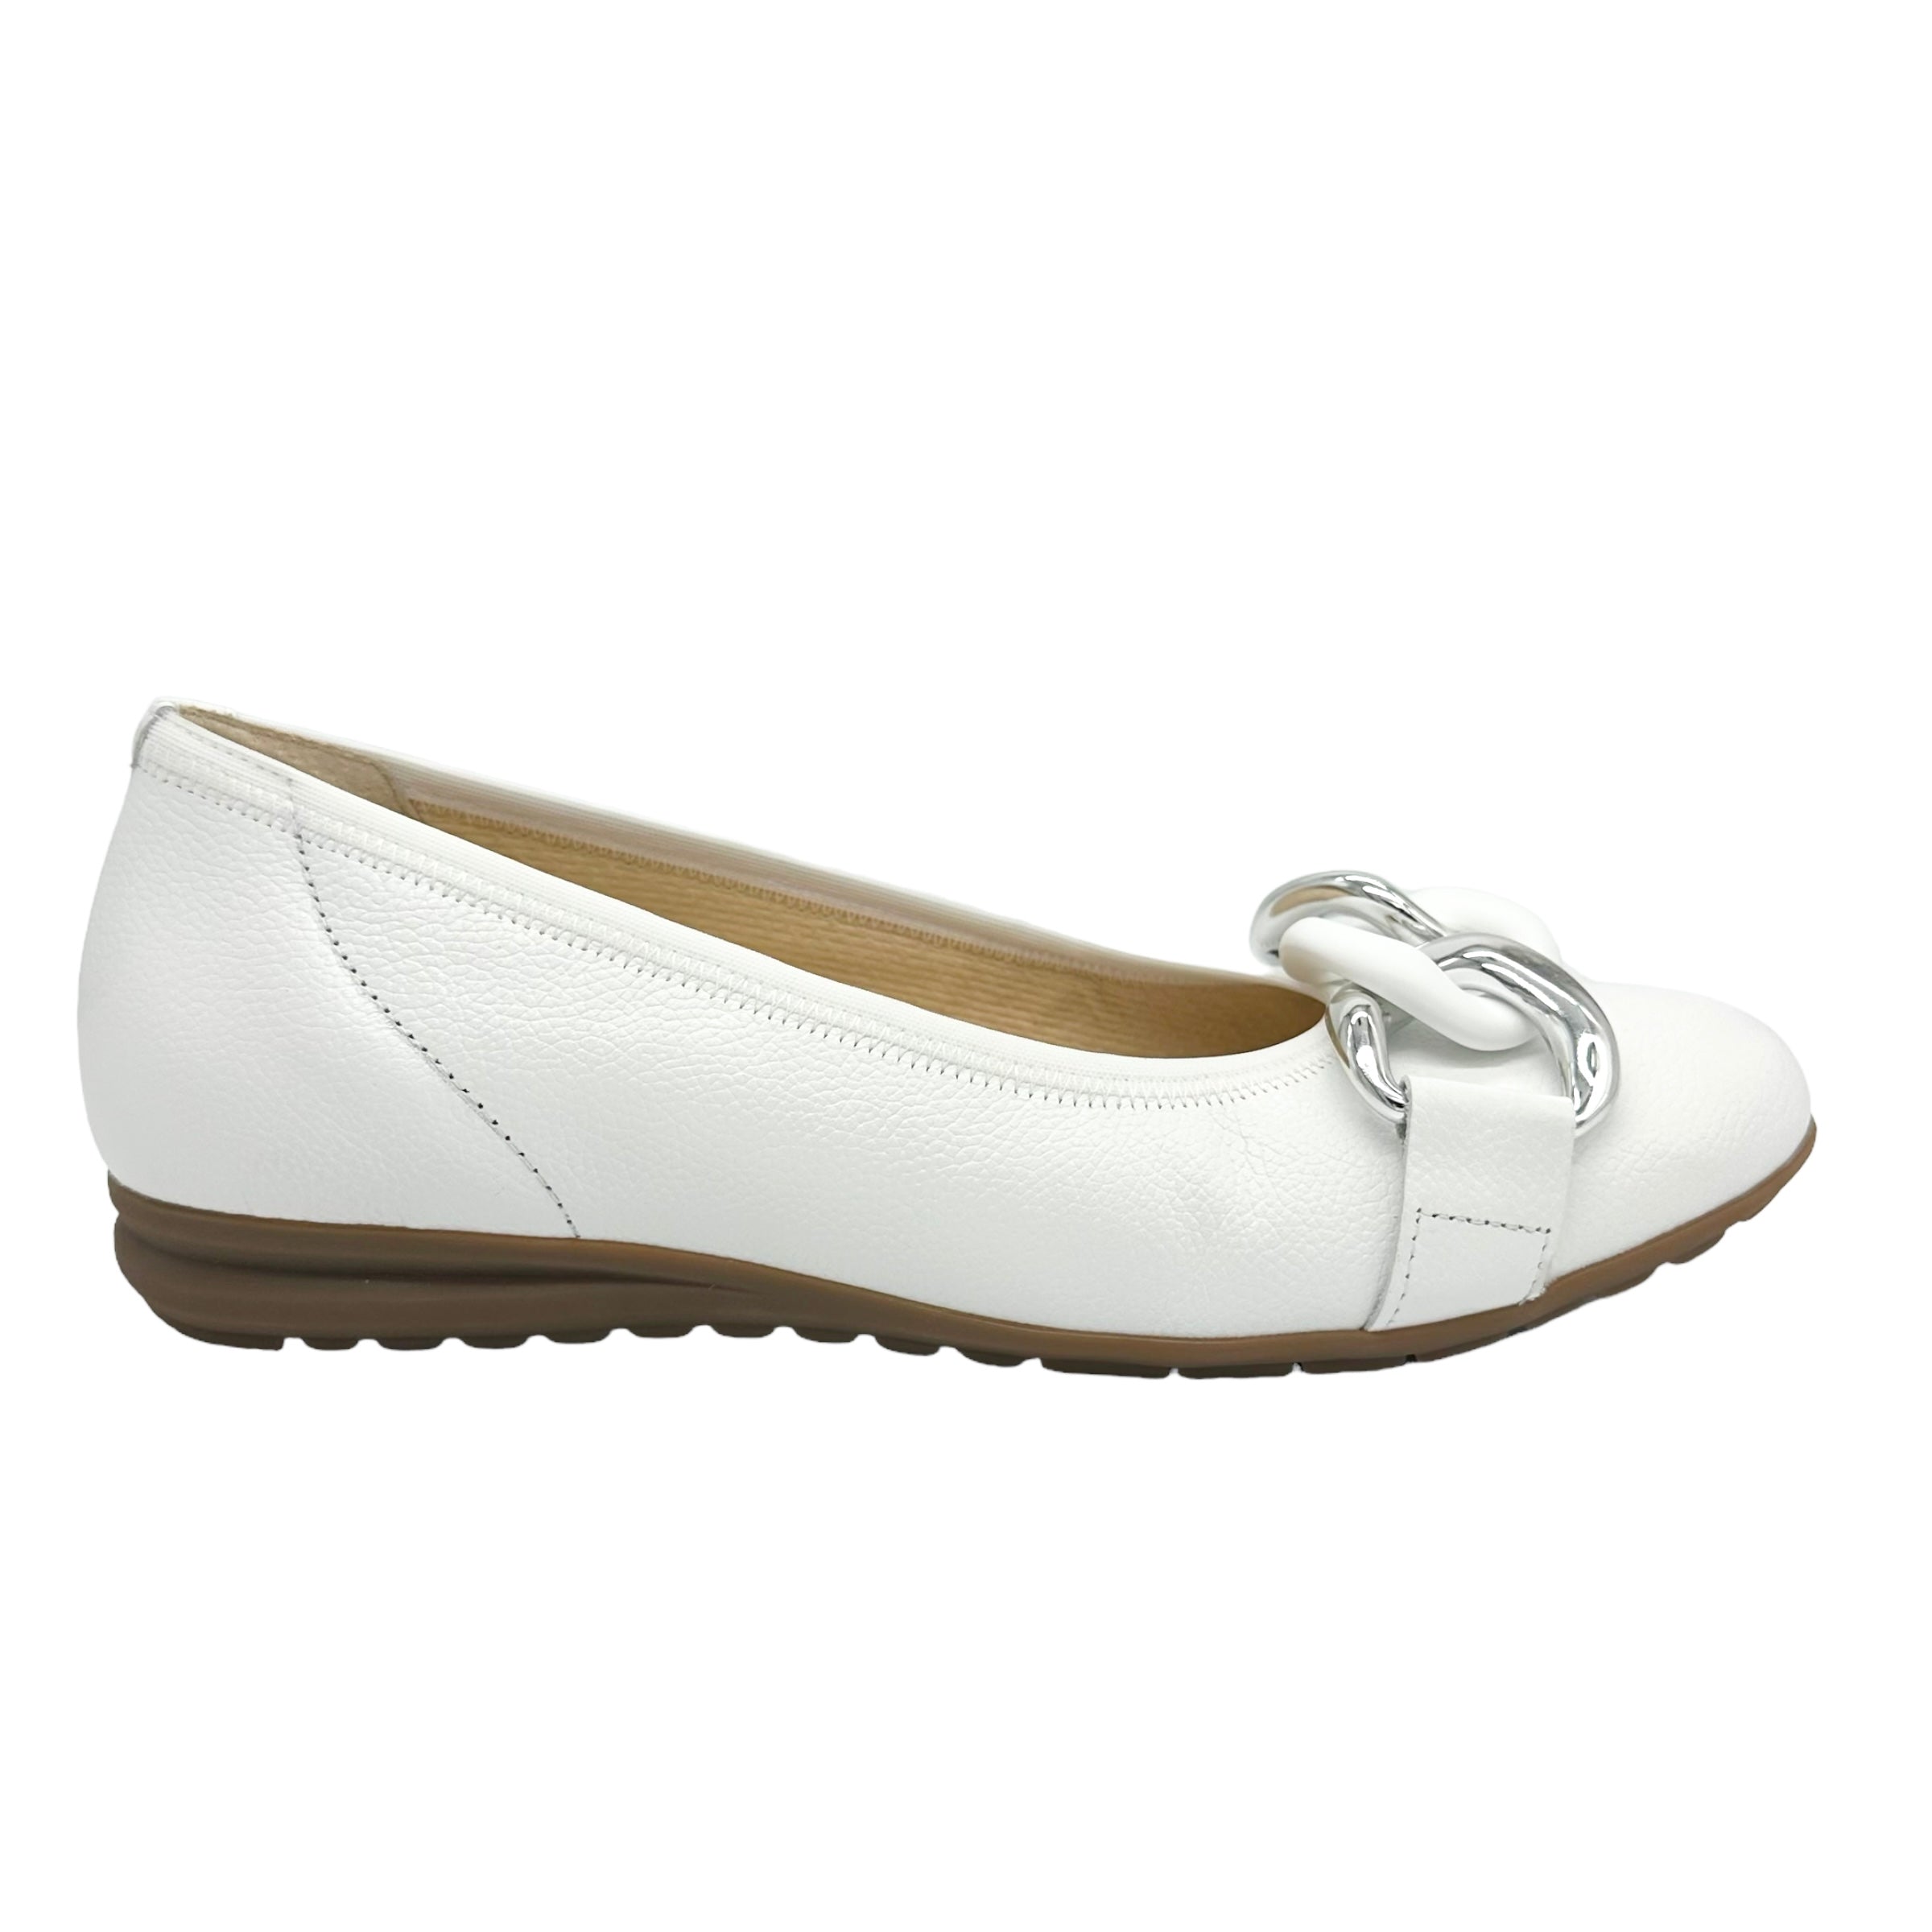 Gabor Sabia women's white leather chic and dressy ballet flats 22.625 ...